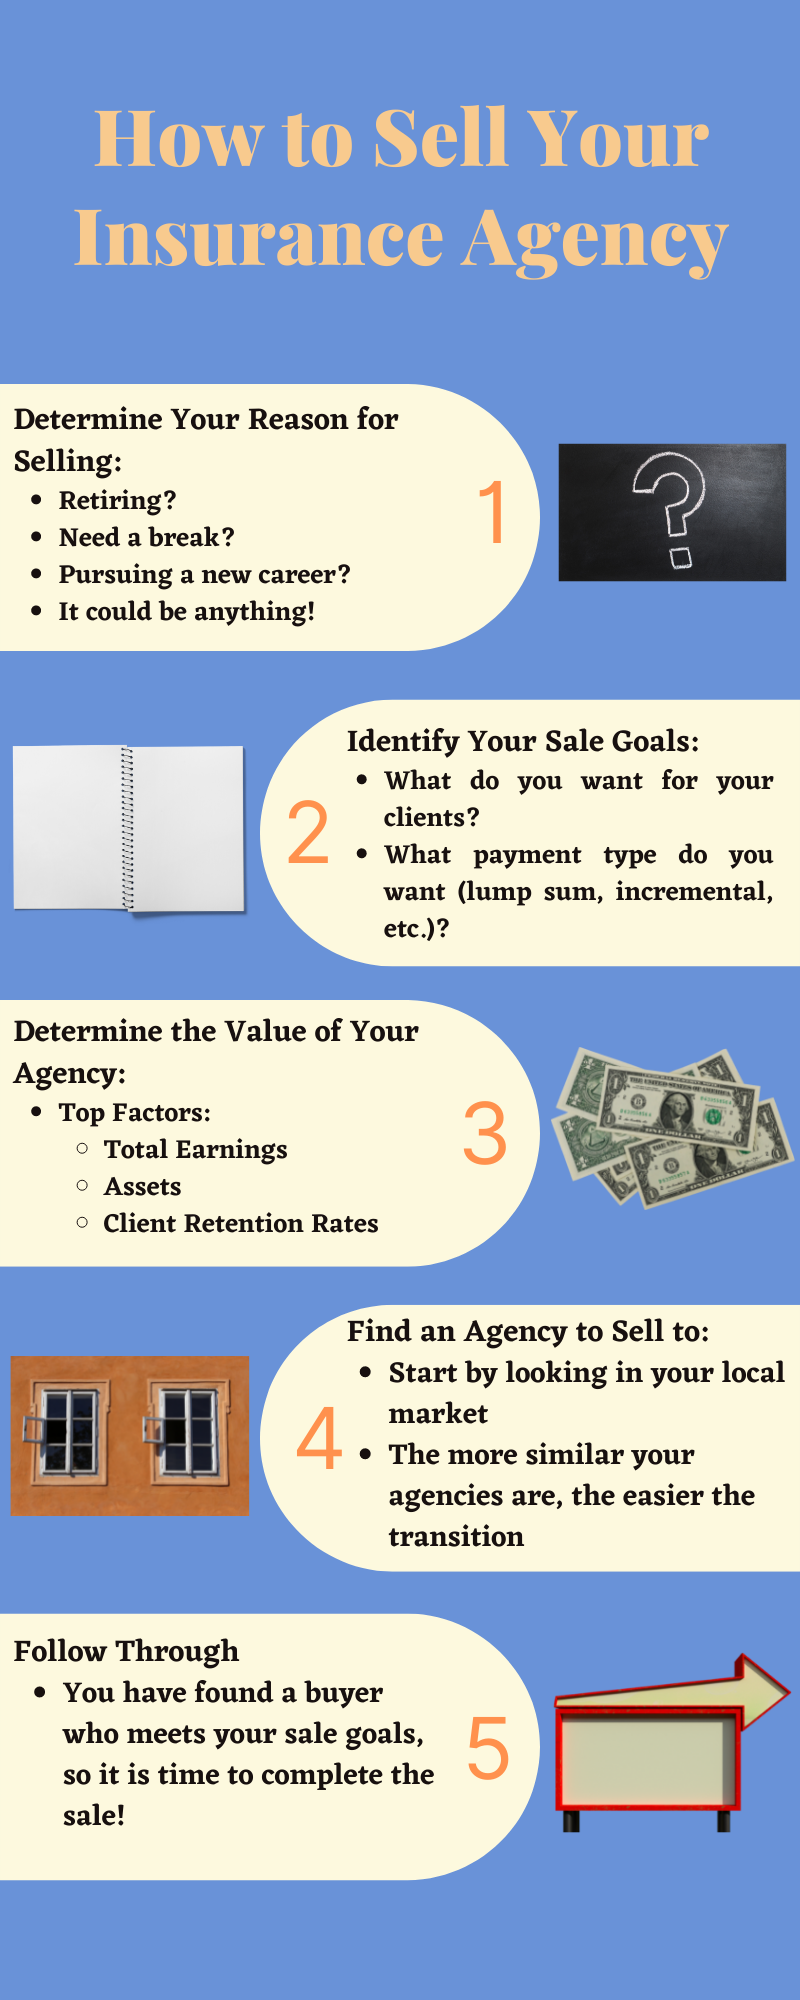 Infographic outlining easy 5-step process to sell an insurance agency. All steps described in full detail in the article.